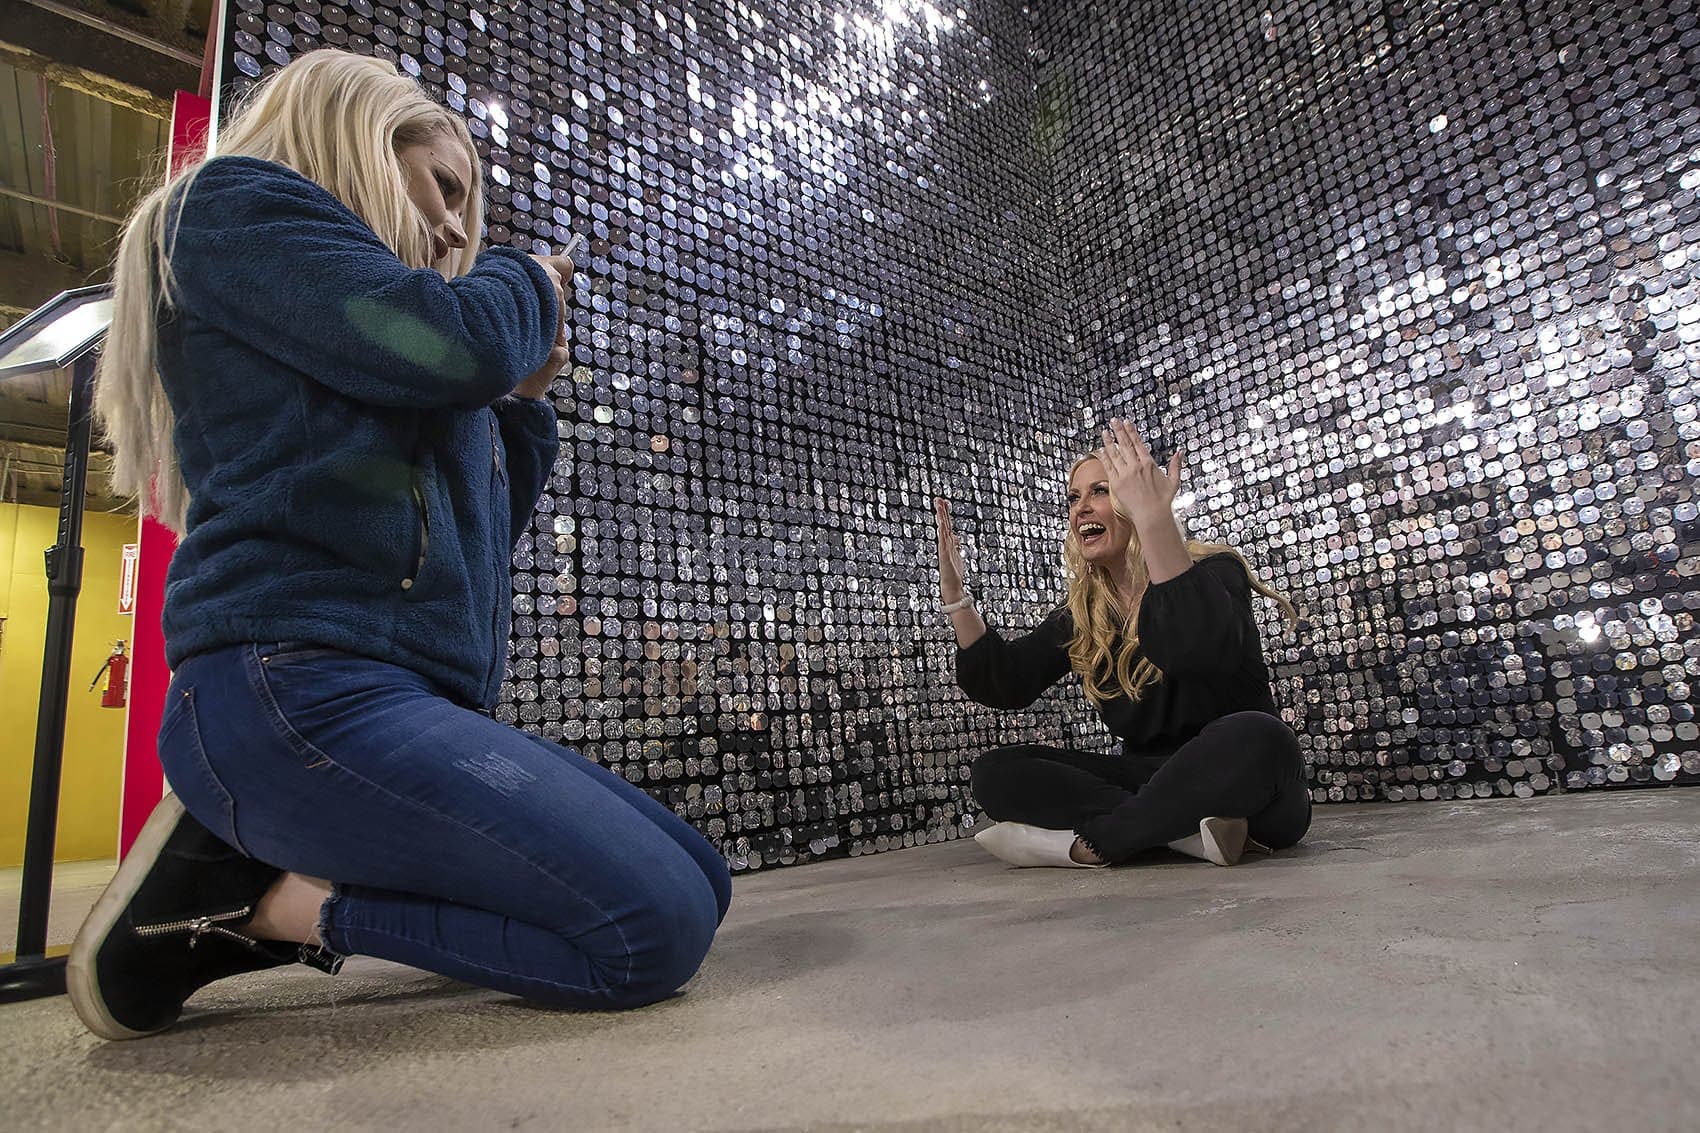 Caroline Gray takes a photo of Sarah Russo with her phone in the glittery space at “Happy Place.” (Jesse Costa/WBUR)